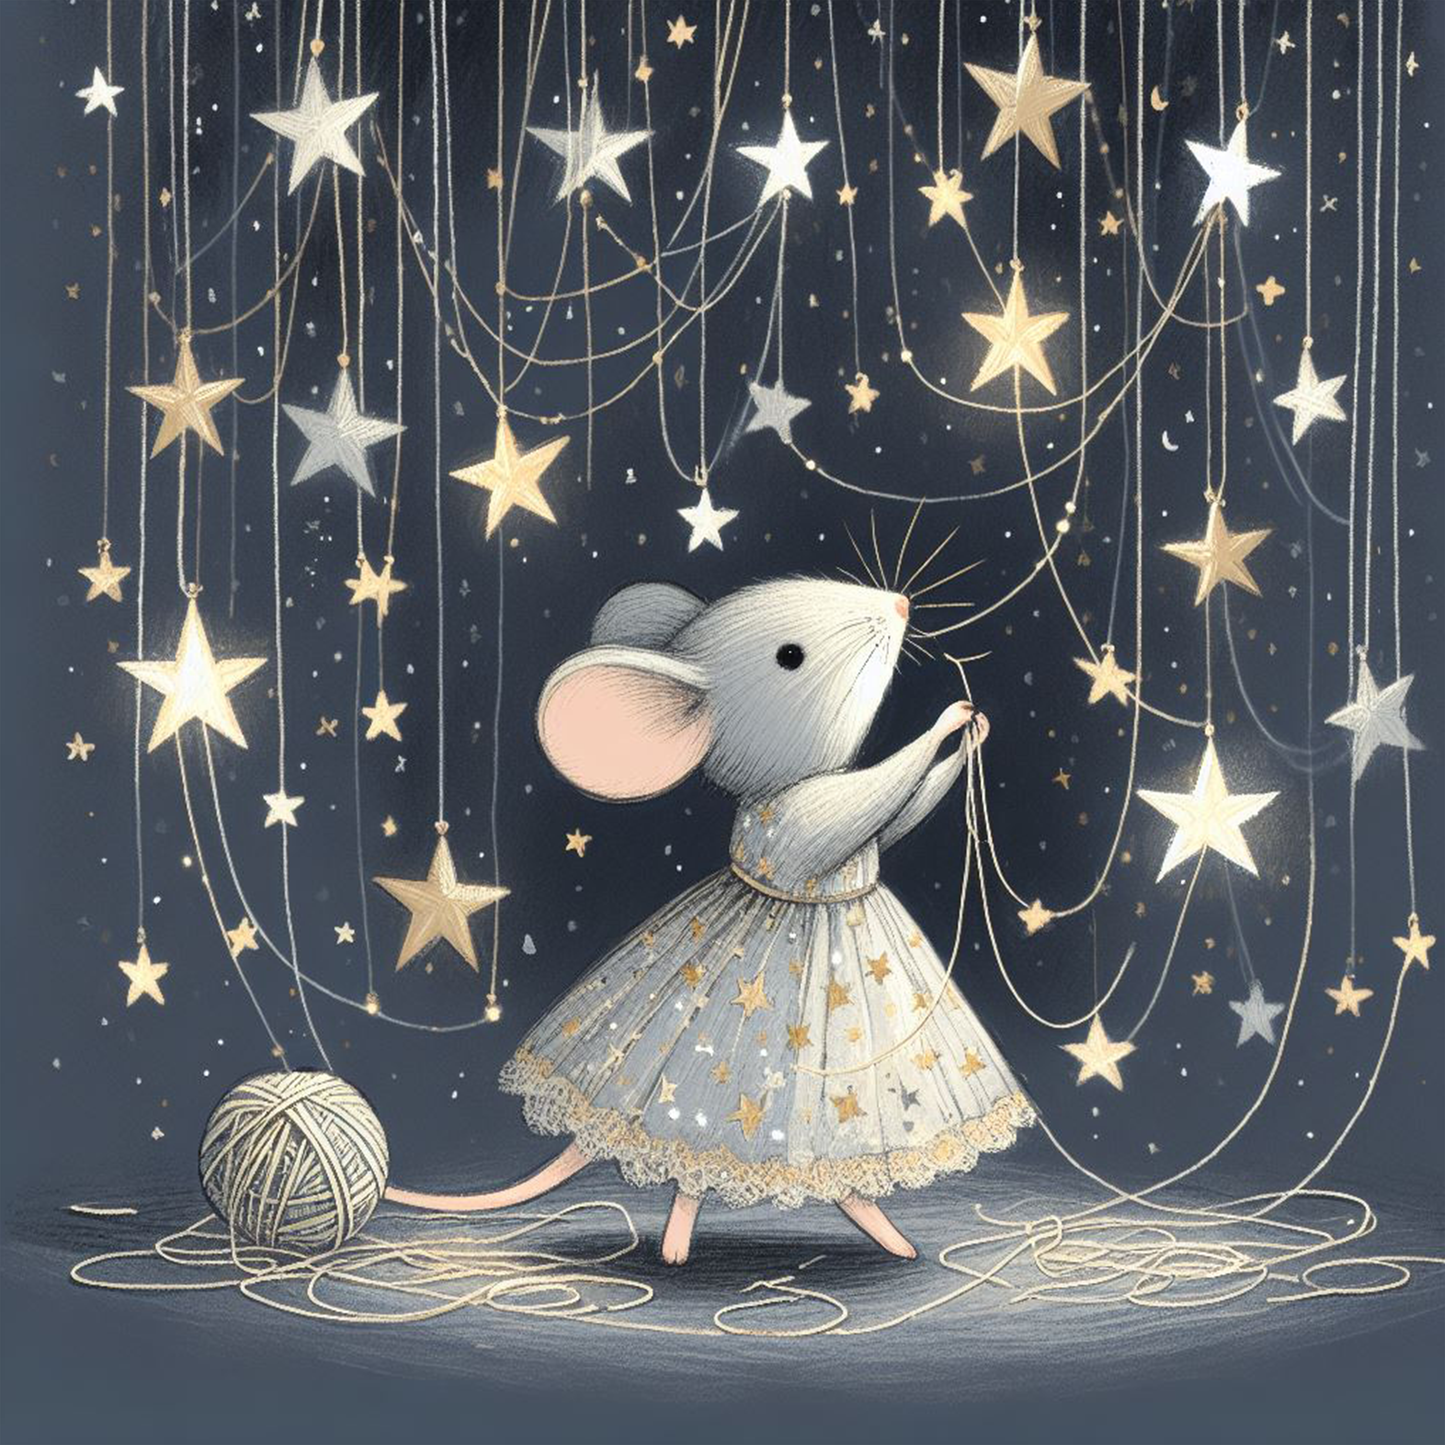 Stardust Mice Collection: Decorate with stars